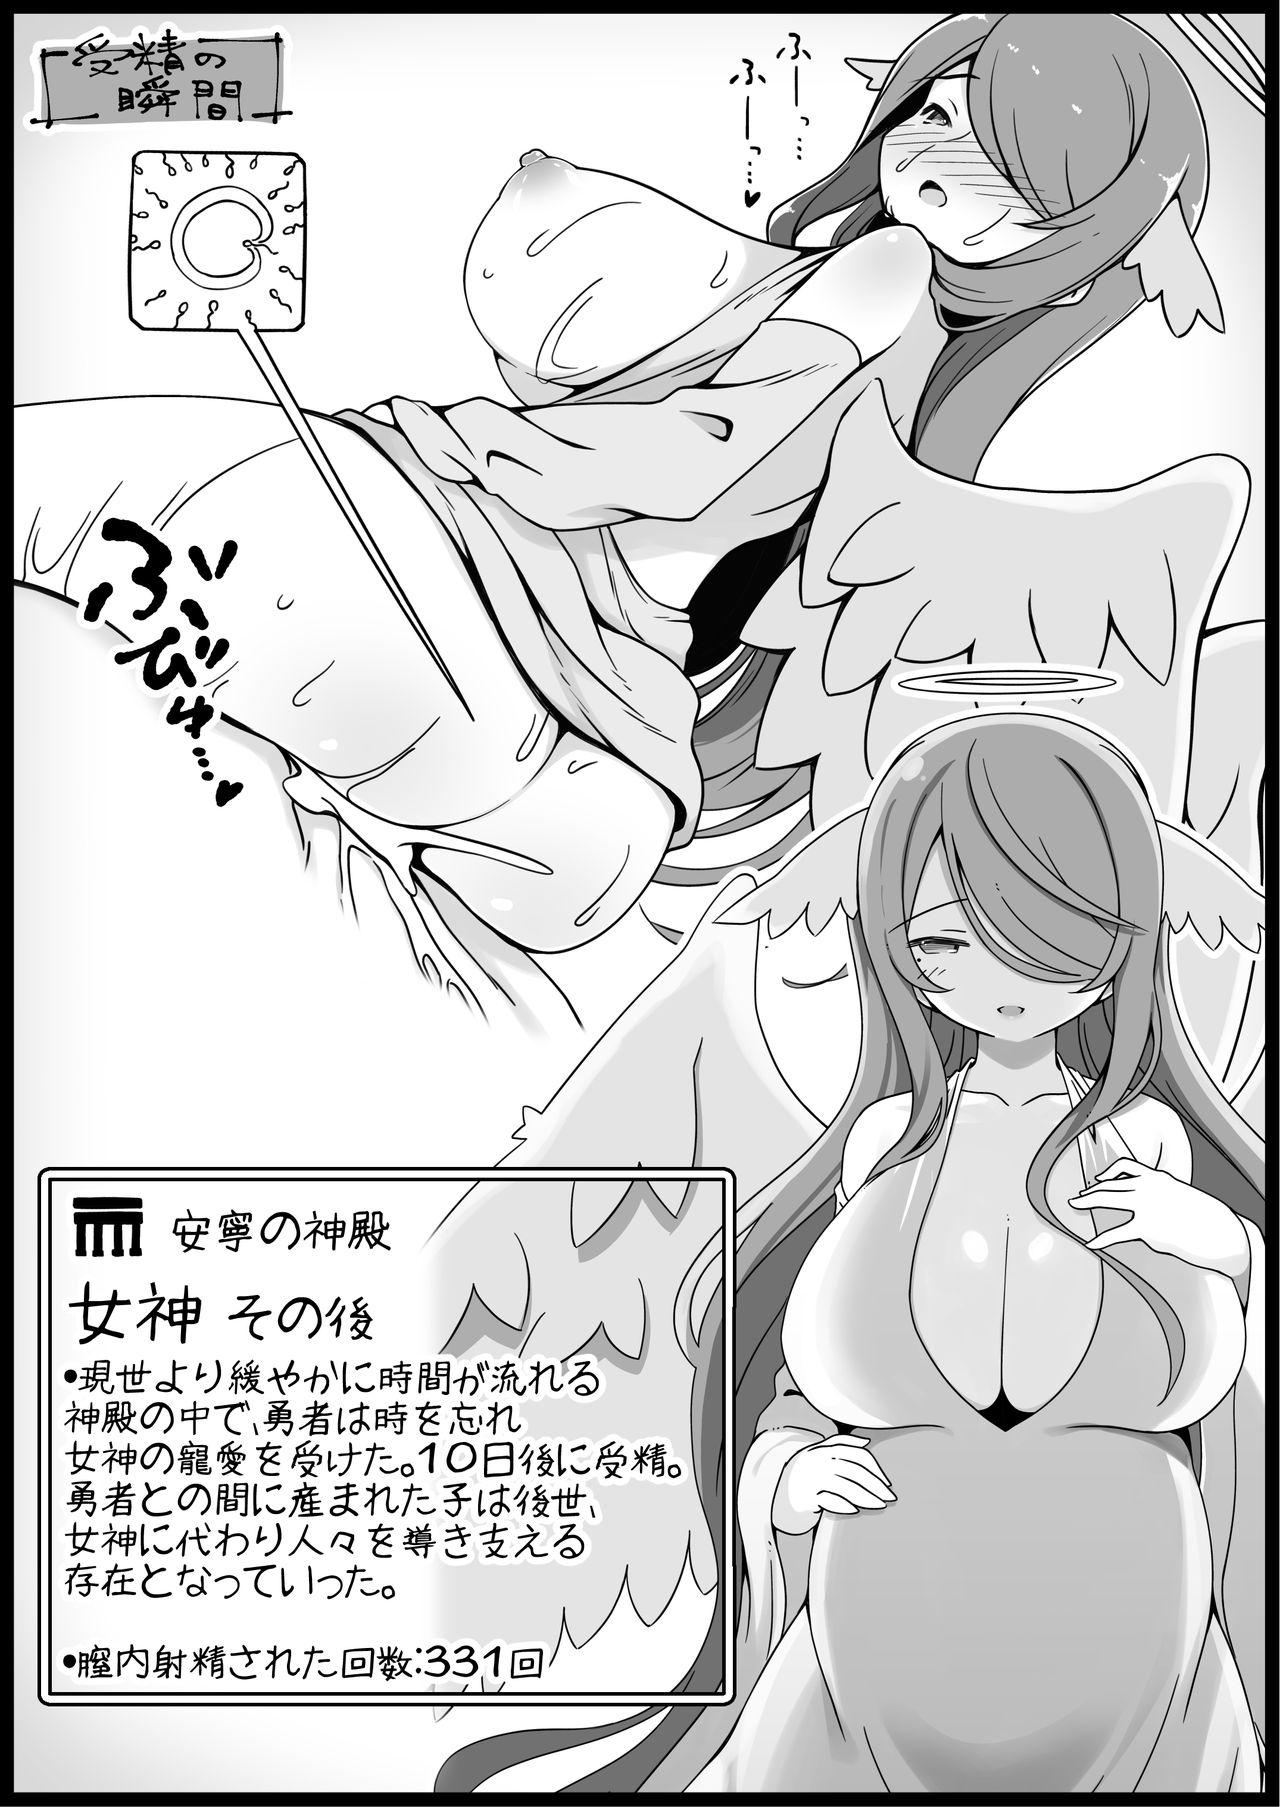 [Succubus Egg] Fantasy World 2 Too Forgiving to Heroes-Continued NPC (mob) Opponent-Centered Short H Manga Collection- 55